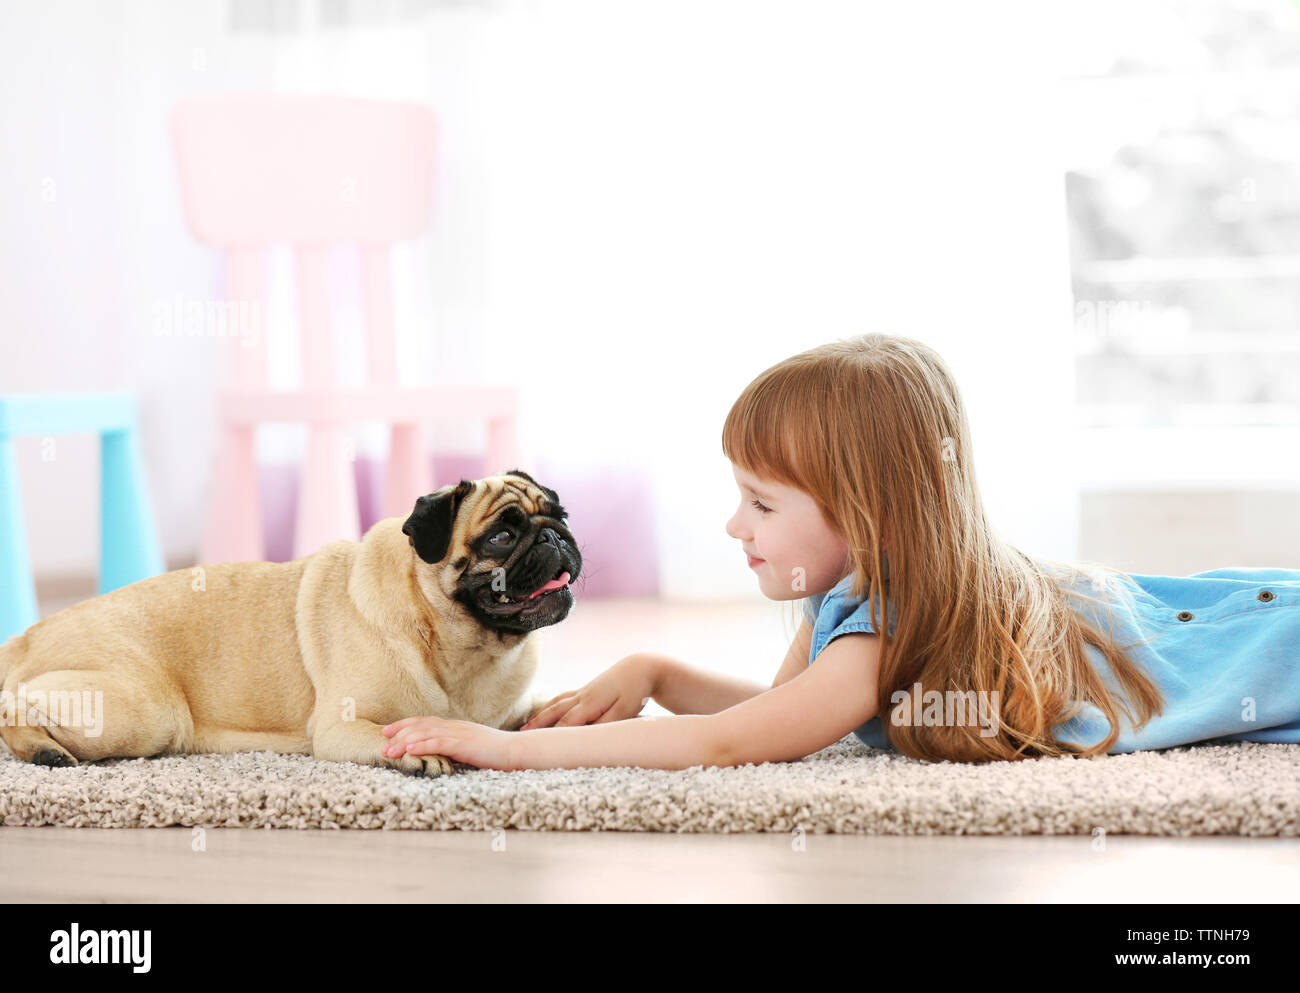 Cute girl playing with dog on carpet Stock Photo